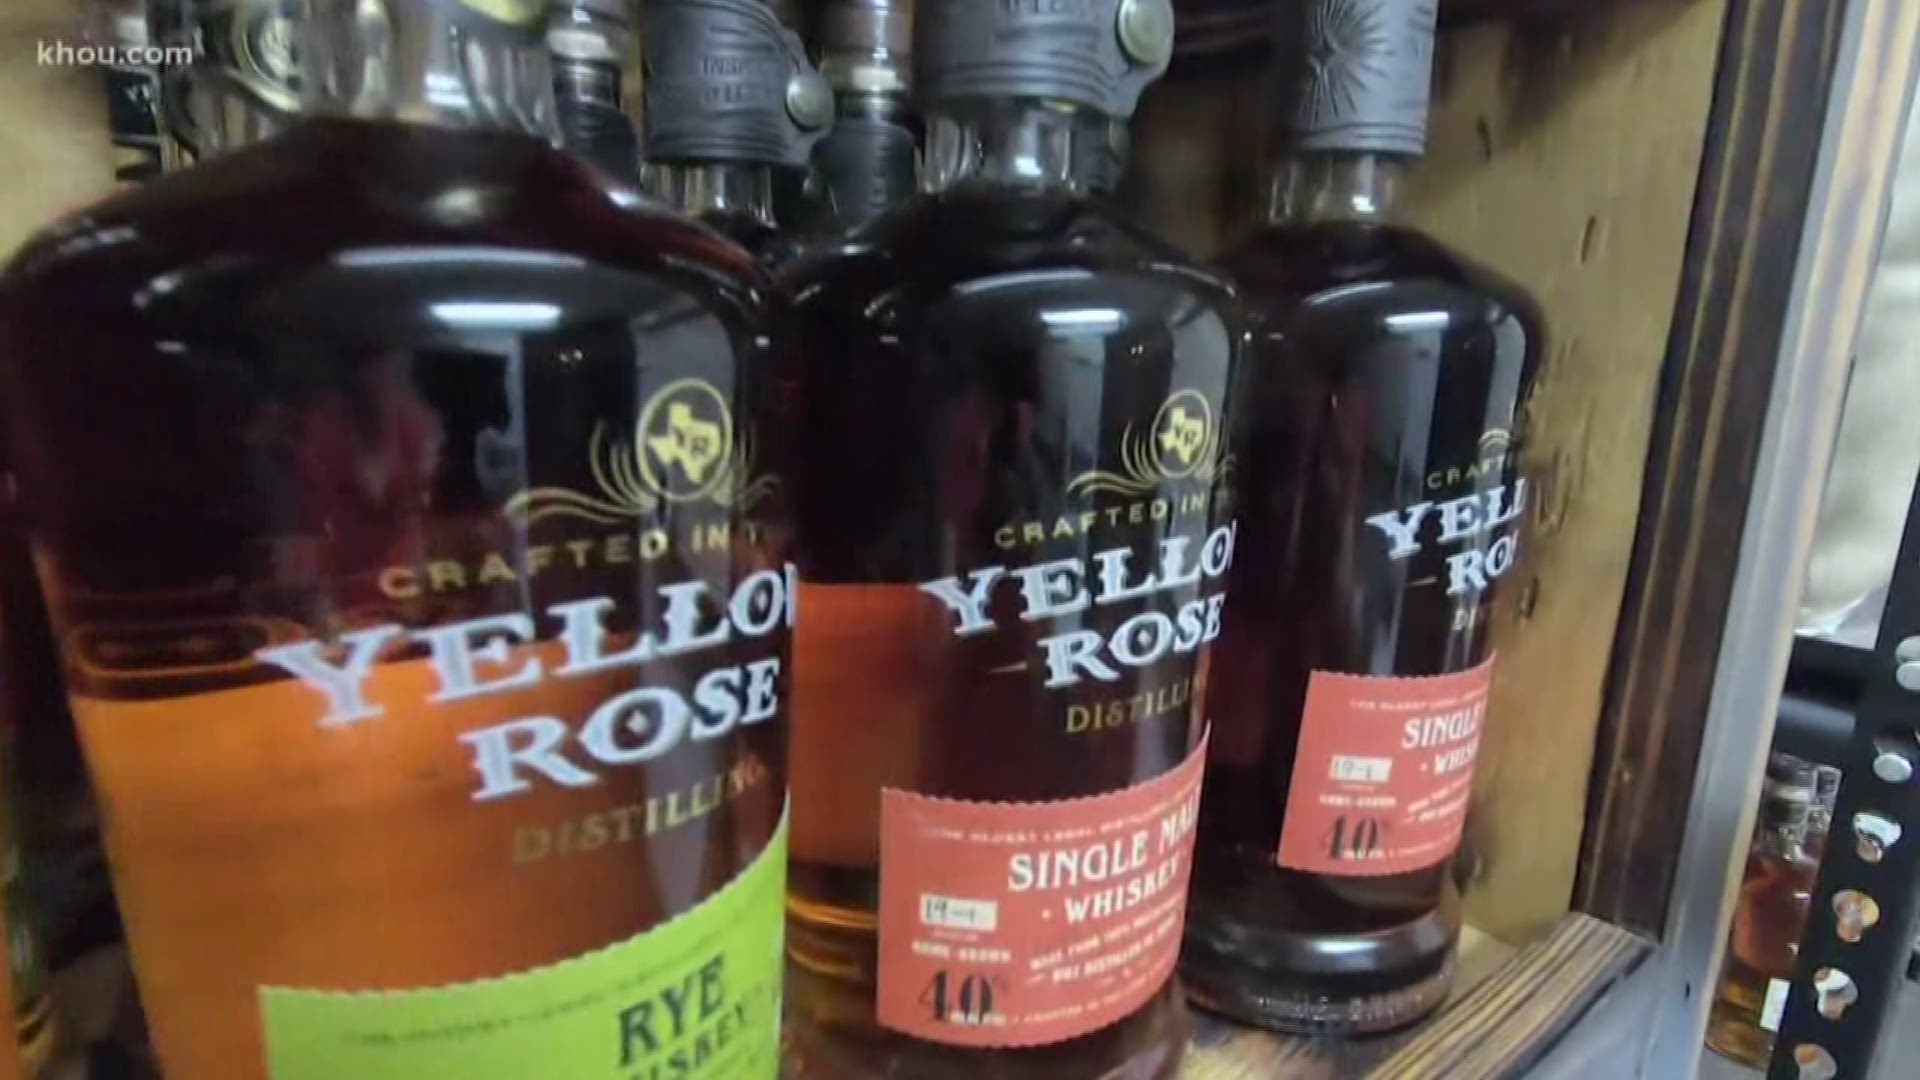 Tucked away off of Post Oak Road is the space city's first legal distillery – Yellow Rose Whiskey.